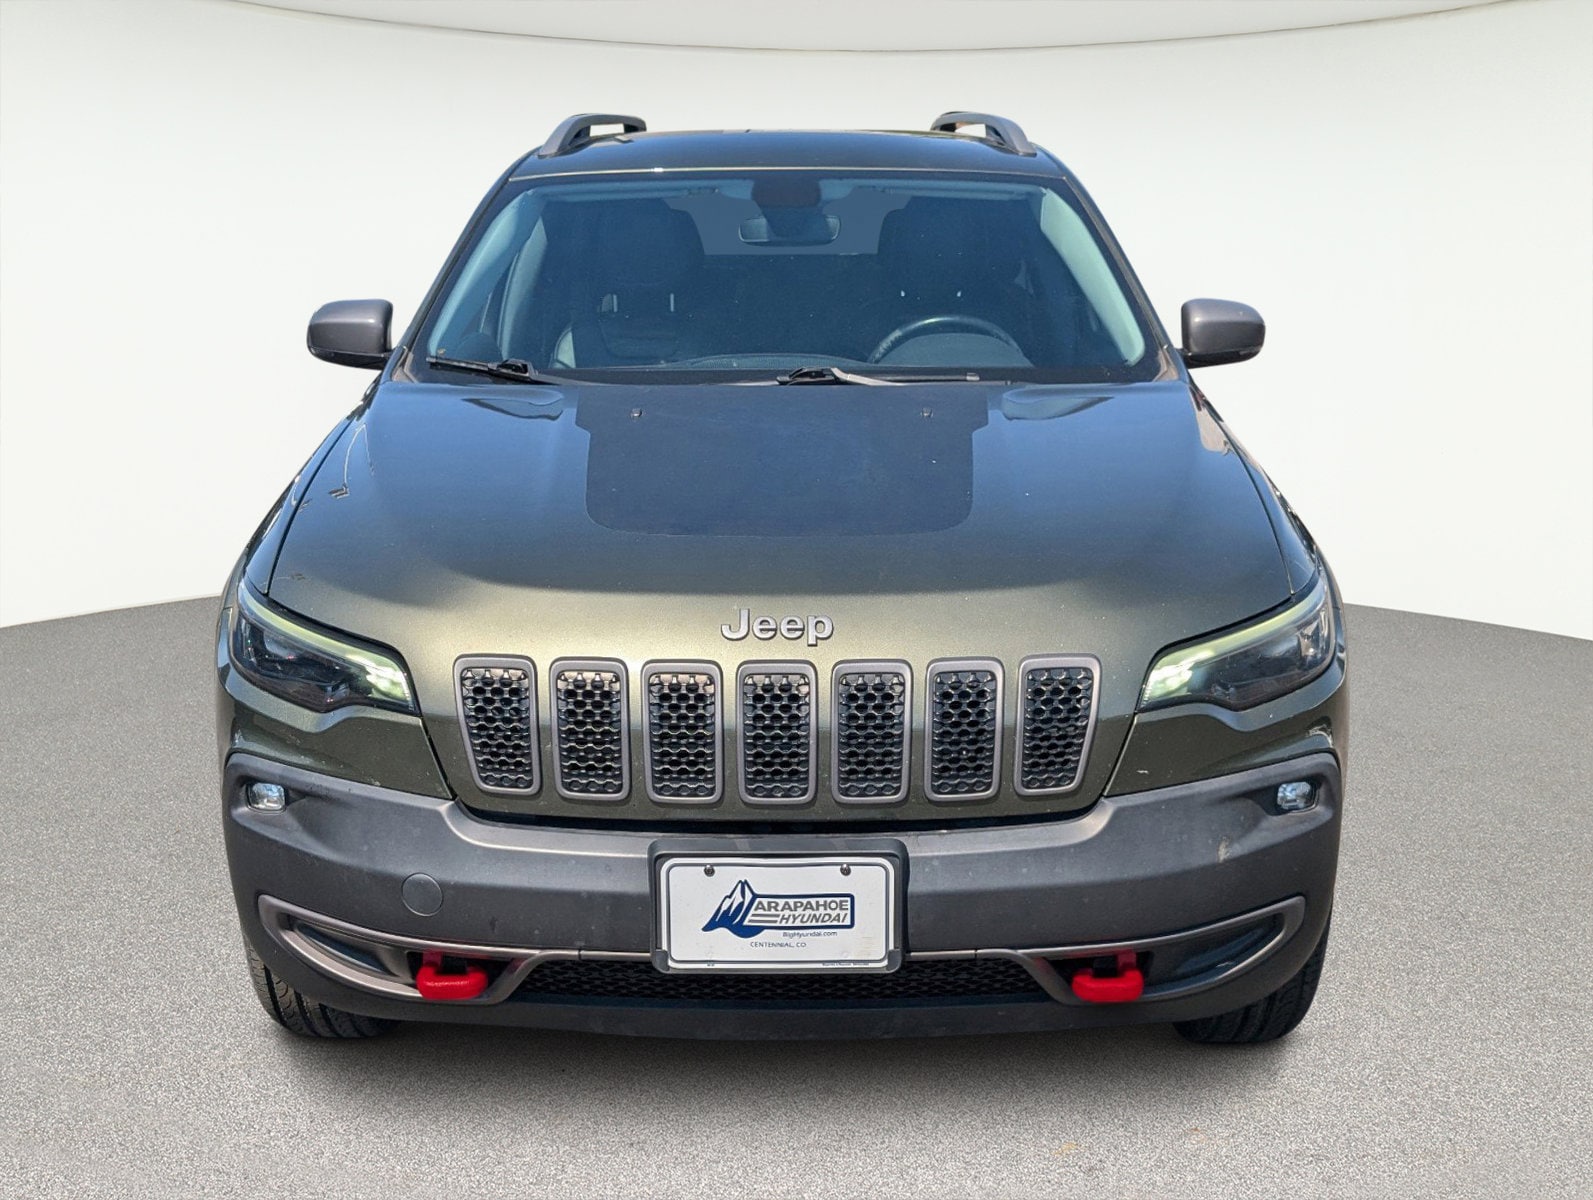 Used 2019 Jeep Cherokee Trailhawk with VIN 1C4PJMBX5KD405182 for sale in Centennial, CO